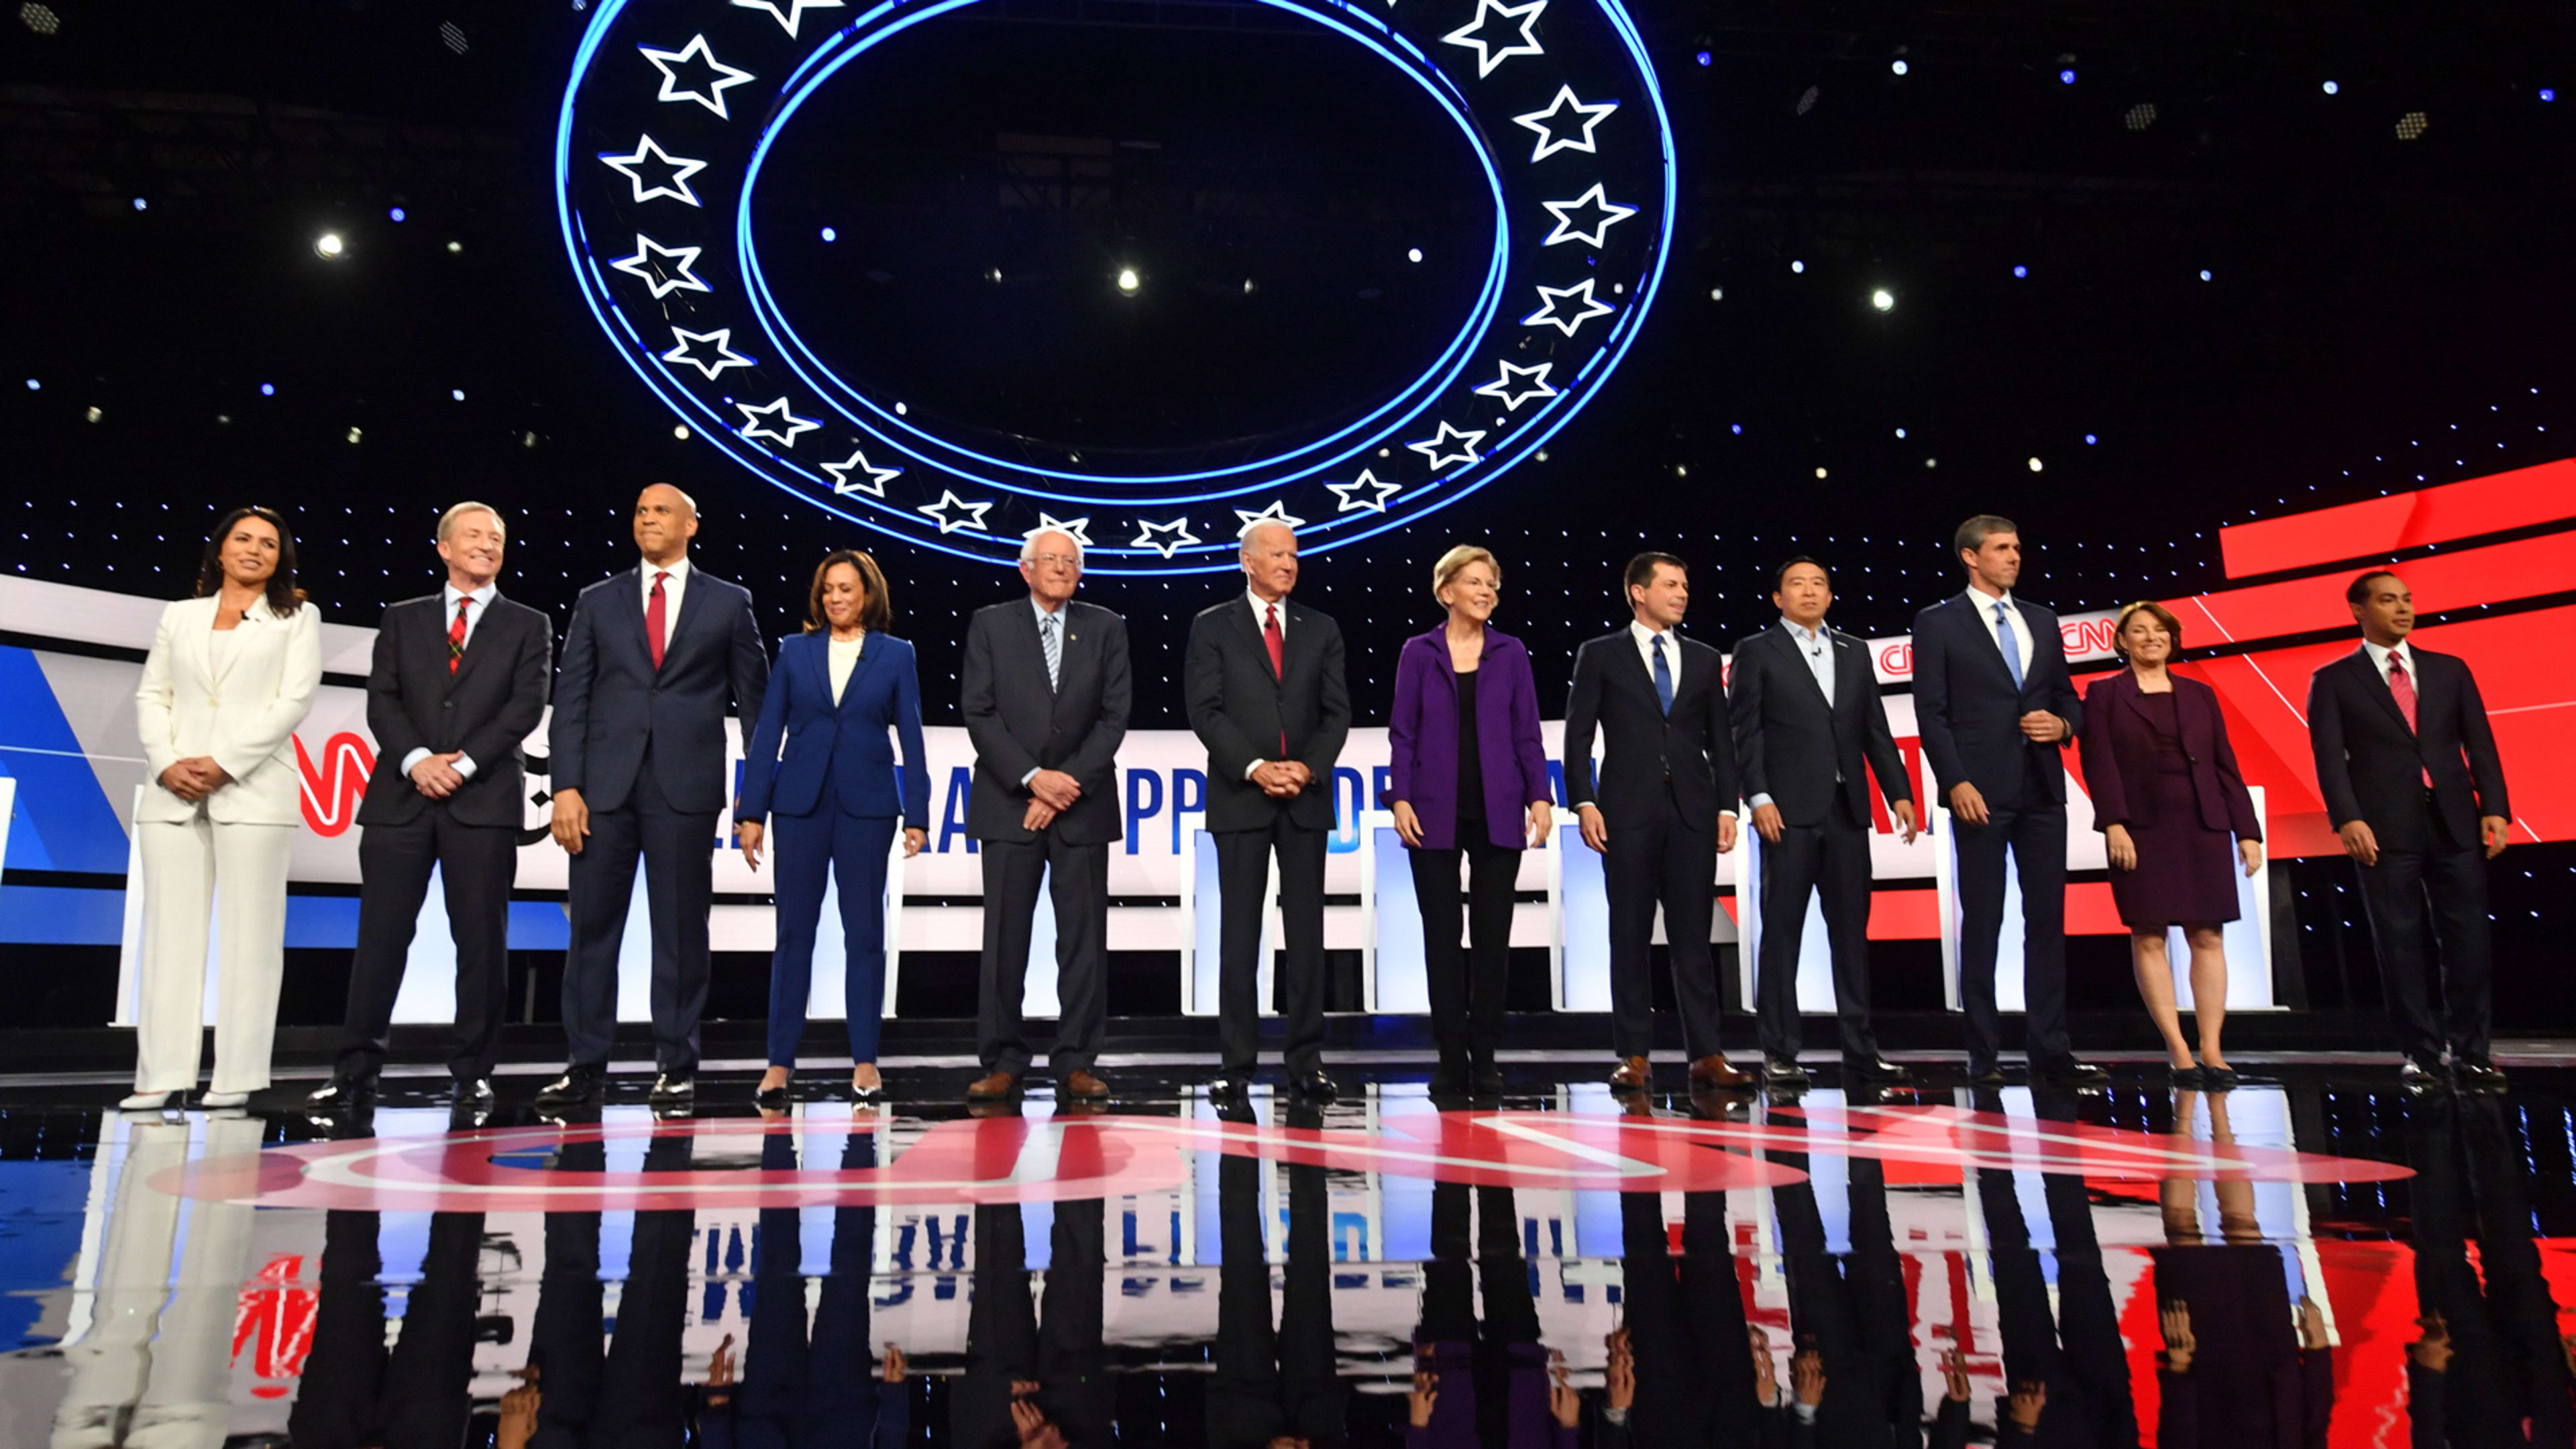 This is what the Democratic candidates say about gender and policy